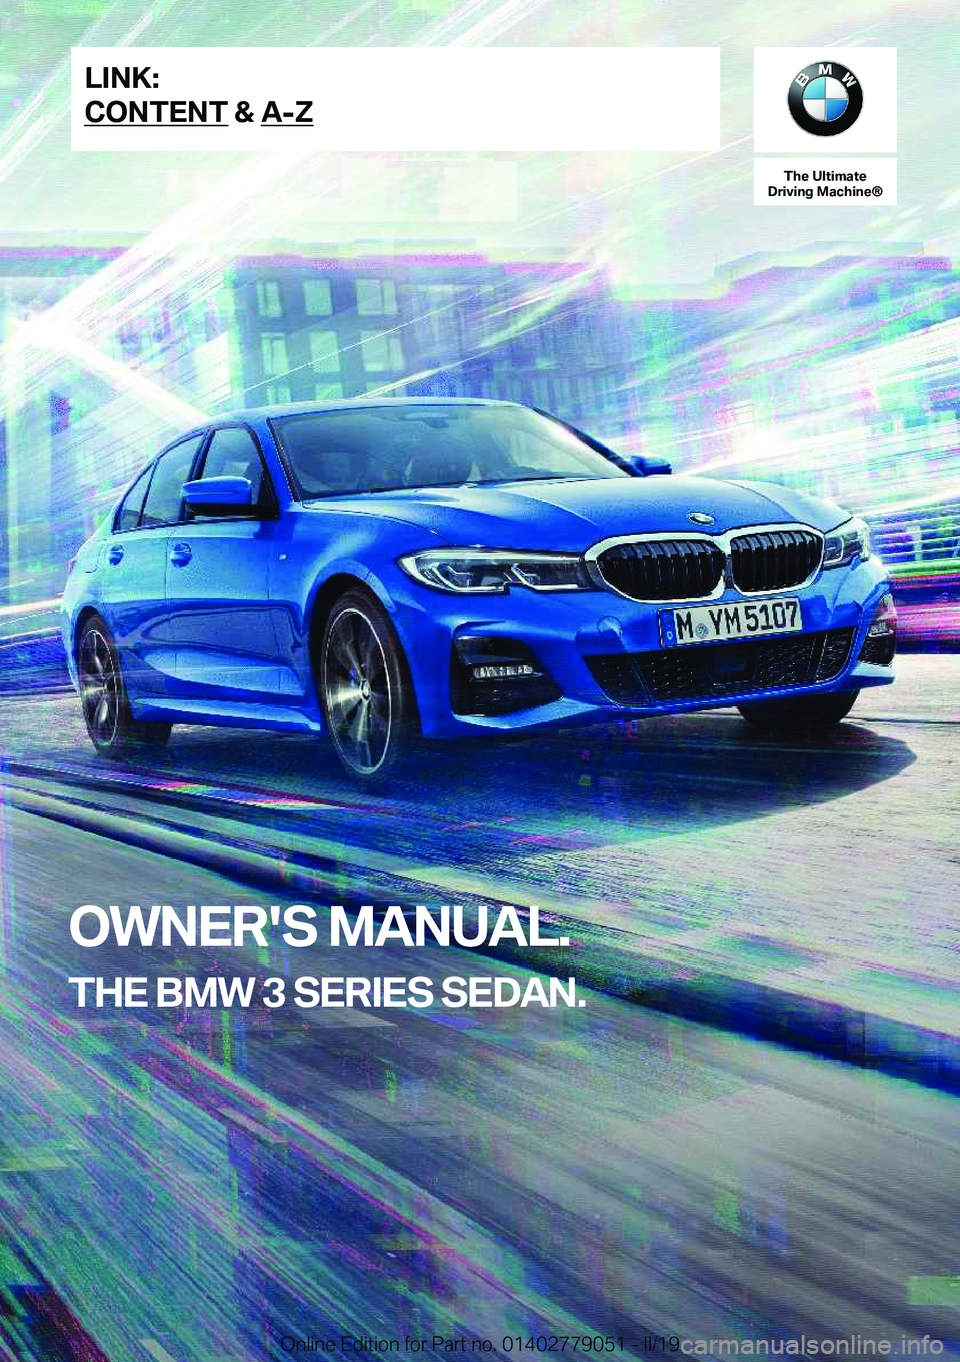 BMW 3 SERIES 2019  Owners Manual �T�h�e��U�l�t�i�m�a�t�e
�D�r�i�v�i�n�g��M�a�c�h�i�n�e�n
�O�W�N�E�R�'�S��M�A�N�U�A�L�.
�T�H�E��B�M�W��3��S�E�R�I�E�S��S�E�D�A�N�.�L�I�N�K�:
�C�O�N�T�E�N�T��&��A�-�Z�O�n�l�i�n�e��E�d�i�t�i